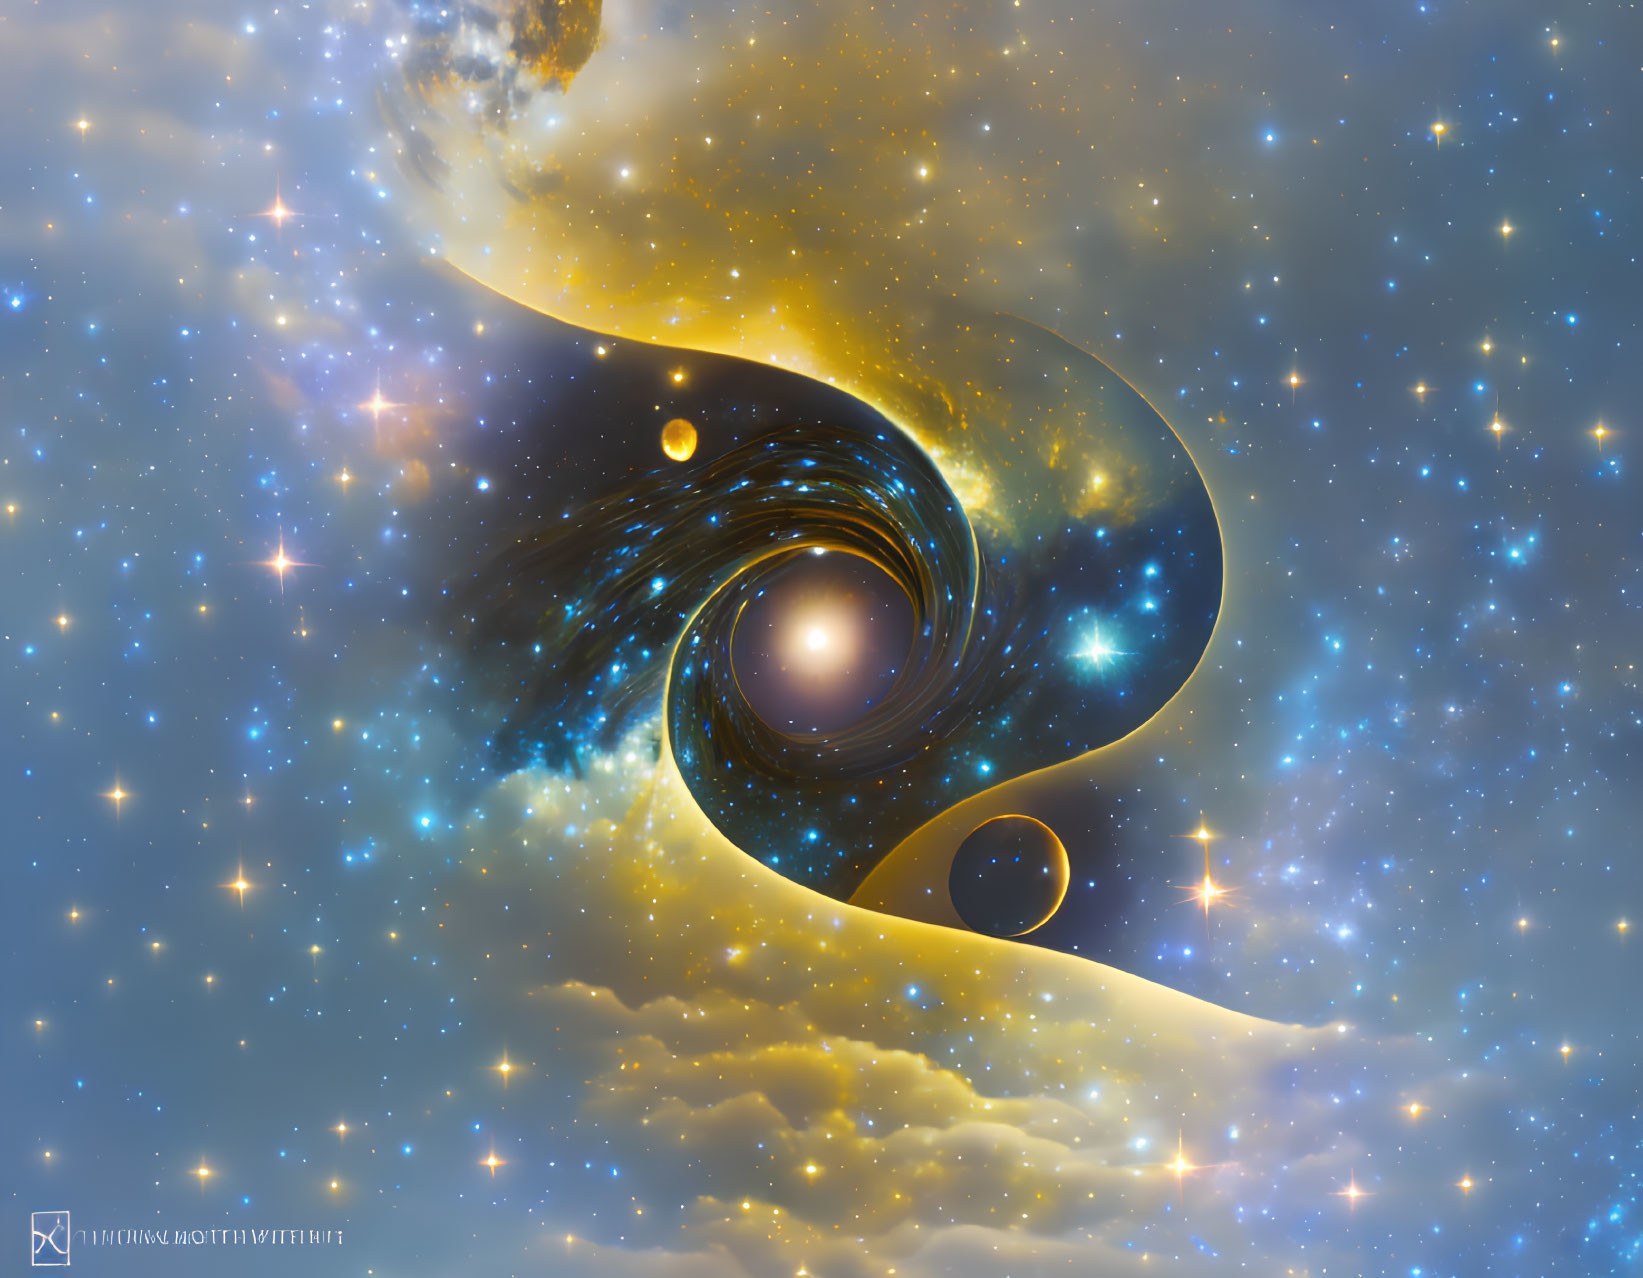 Abstract cosmic digital artwork of swirling stars and galaxies in yin-yang motif